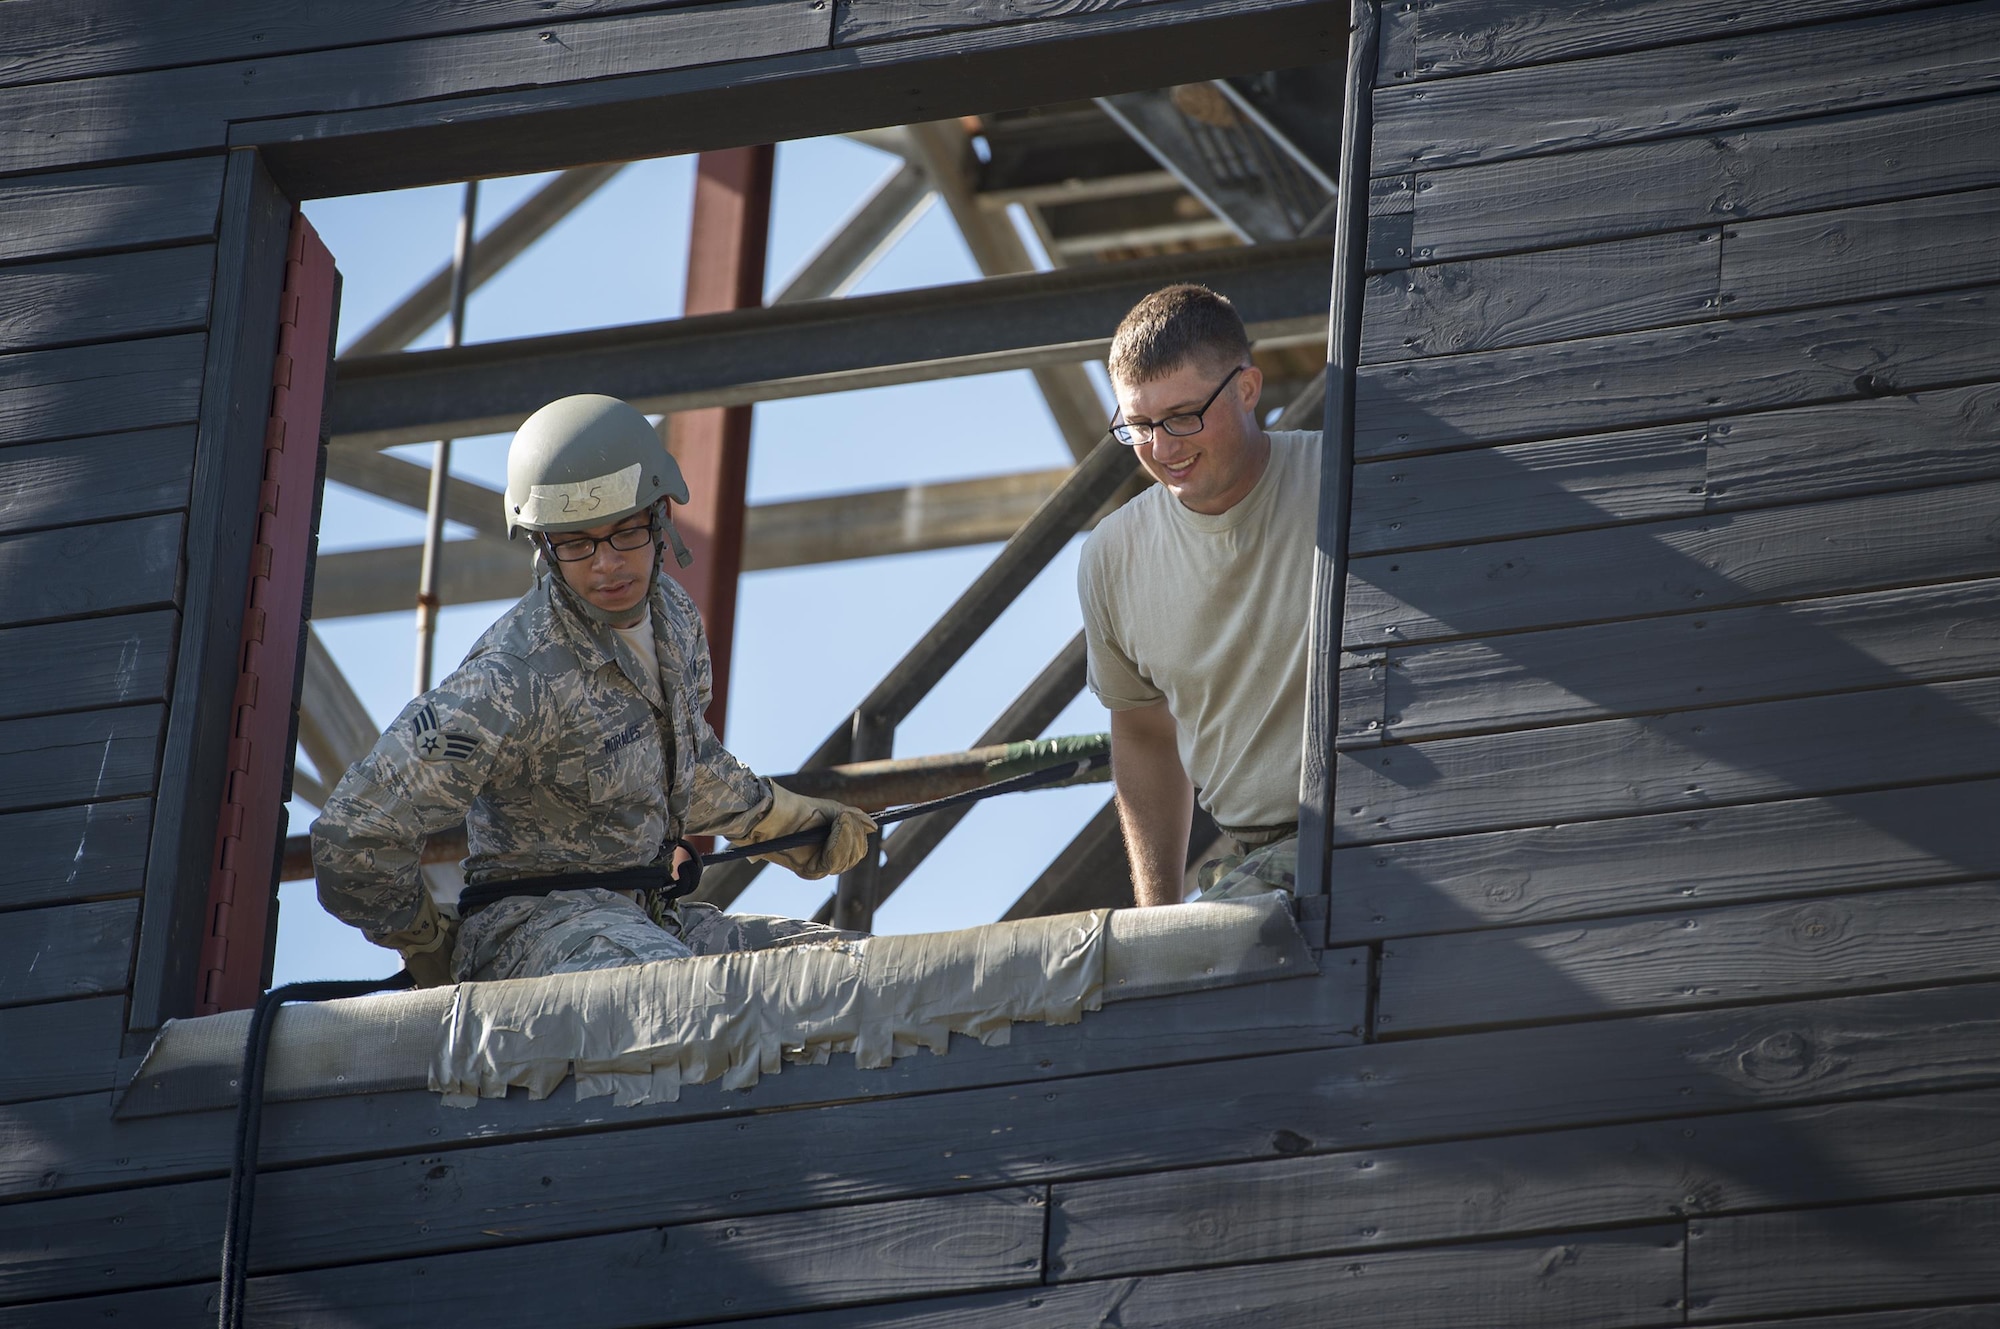 Senior Airman Steven Morales, 45th Security Forces patrolman from Patrick Air Force Base, Fla., prepares to rappel during an Army Air Assault assessment, May 17, 2017, at Moody Air Force Base, Ga. Twenty-six Airmen attended the assessment which measured candidates’ aptitude in Air Assault operations, completion of equipment layouts, and rappelling. (U.S. Air Force photo by Tech. Sgt. Zachary Wolf)